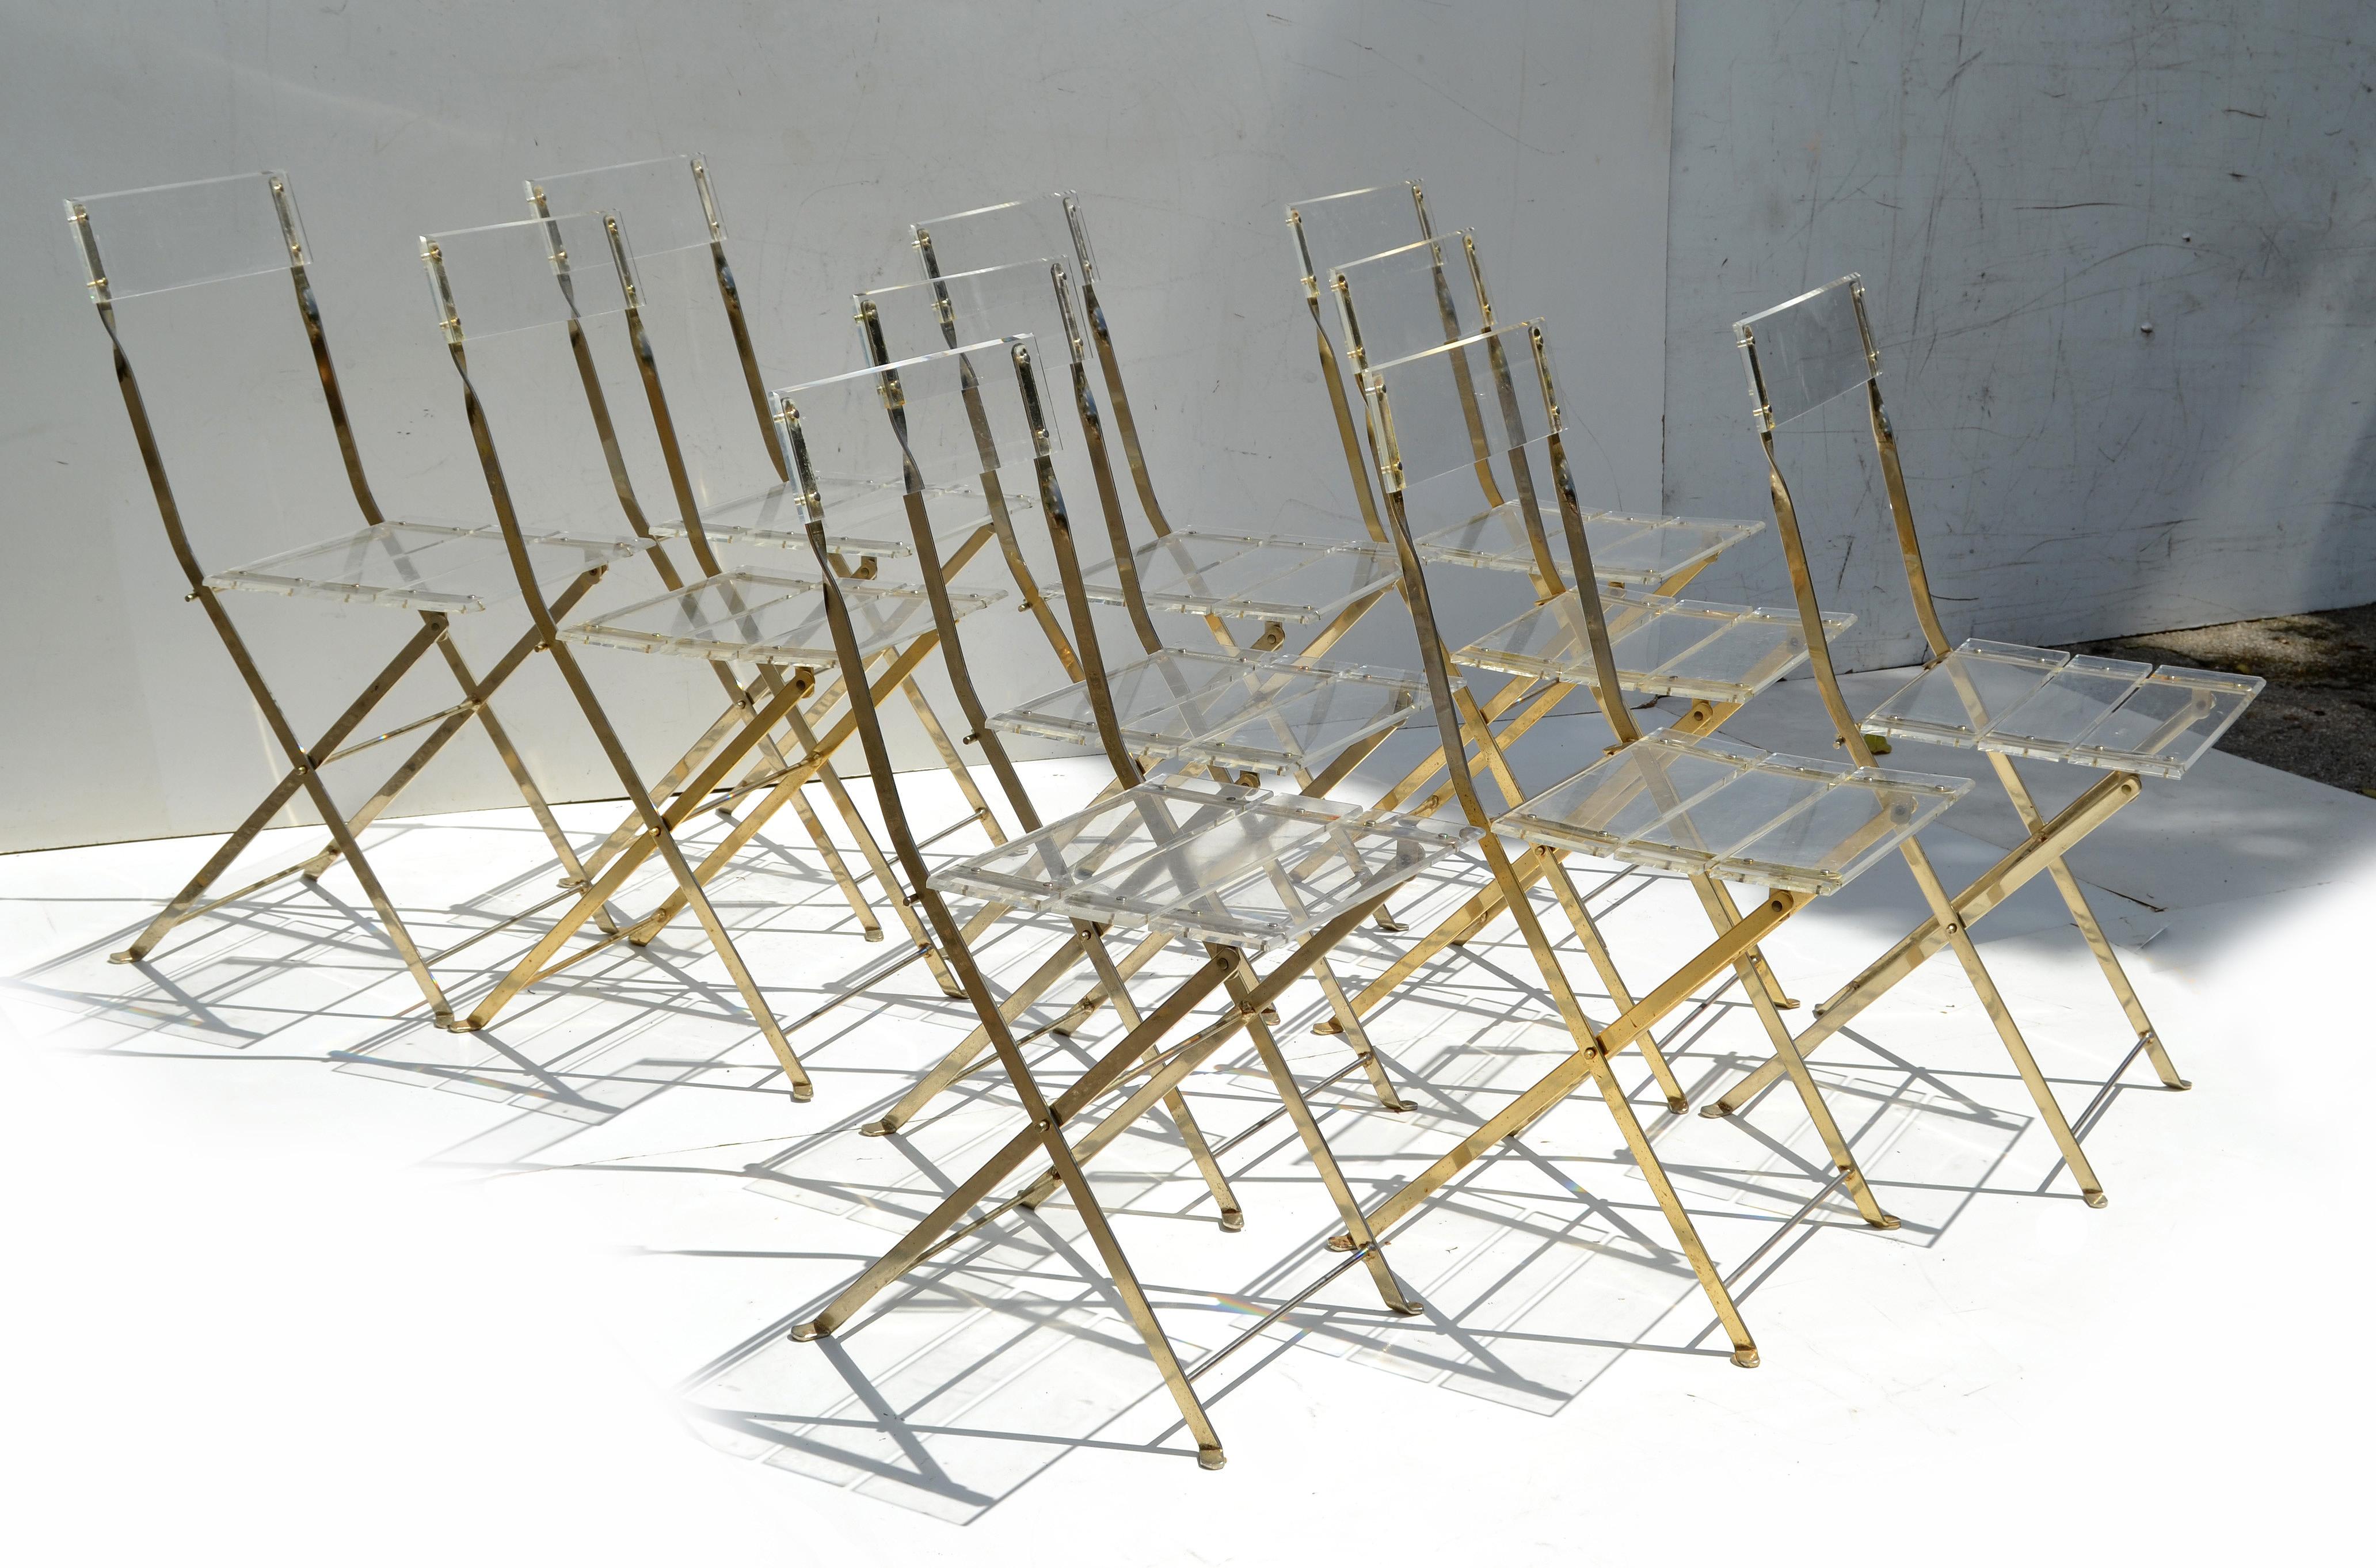 Mid-Century Modern Set of 10 Lucite Folding Chairs by Yonel Lebovici for Marais International 1970